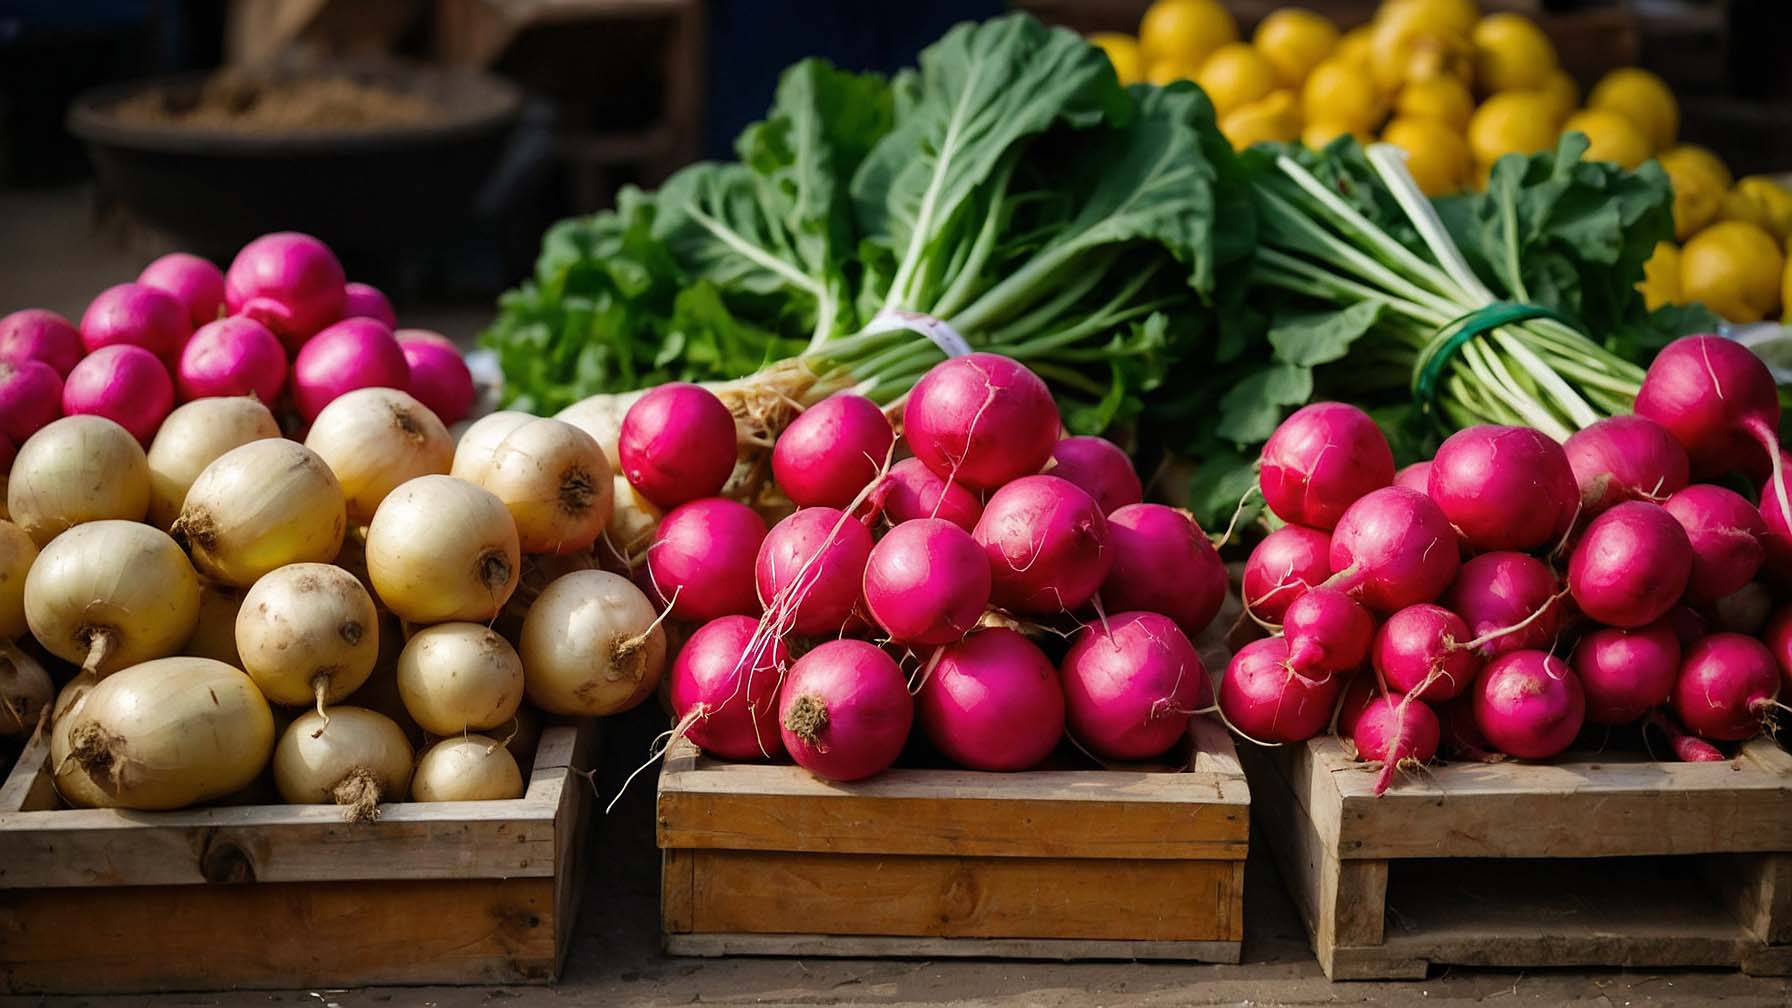 Turnips vs Radish on the Menu: From Soil to Plate